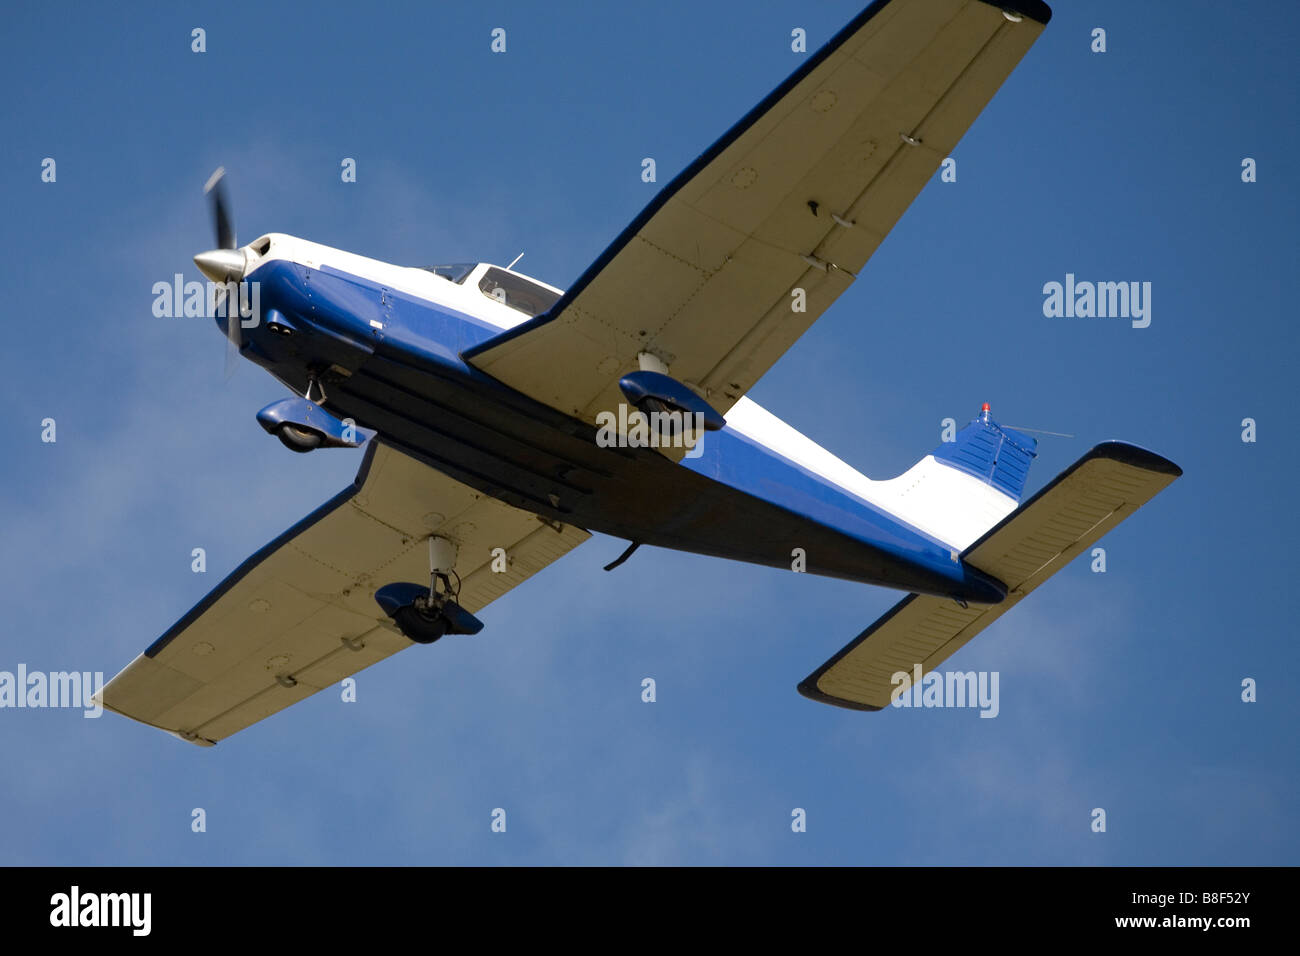 Aircraft Airplane Blue sky Flying In Flight Plane Stock Photo